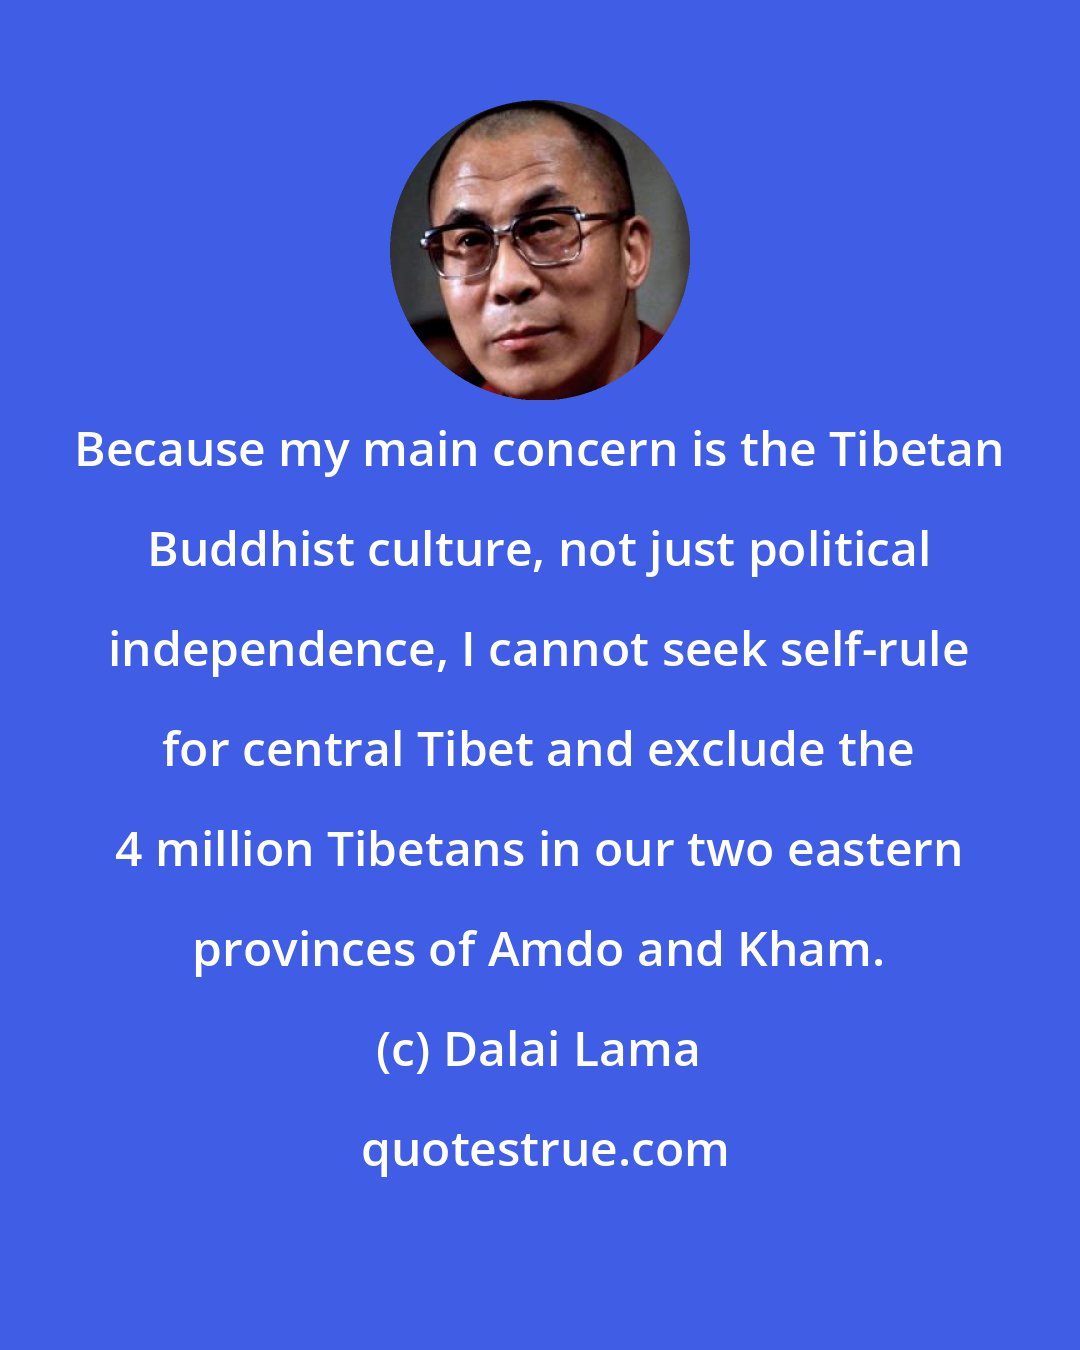 Dalai Lama: Because my main concern is the Tibetan Buddhist culture, not just political independence, I cannot seek self-rule for central Tibet and exclude the 4 million Tibetans in our two eastern provinces of Amdo and Kham.